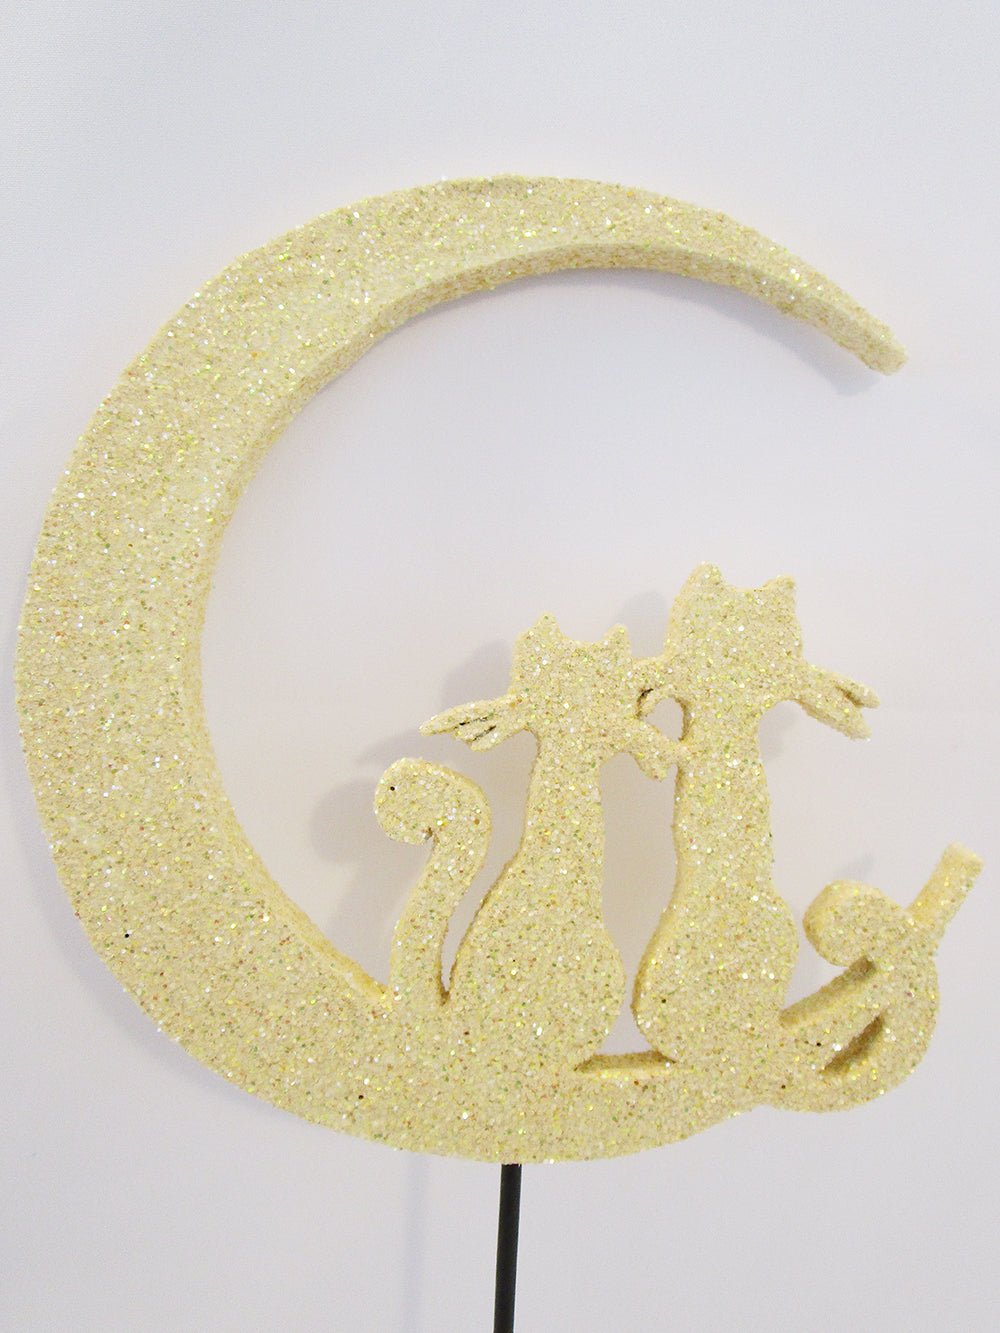 Cats on the Moon Styrofoam cutout - Designs by Ginny